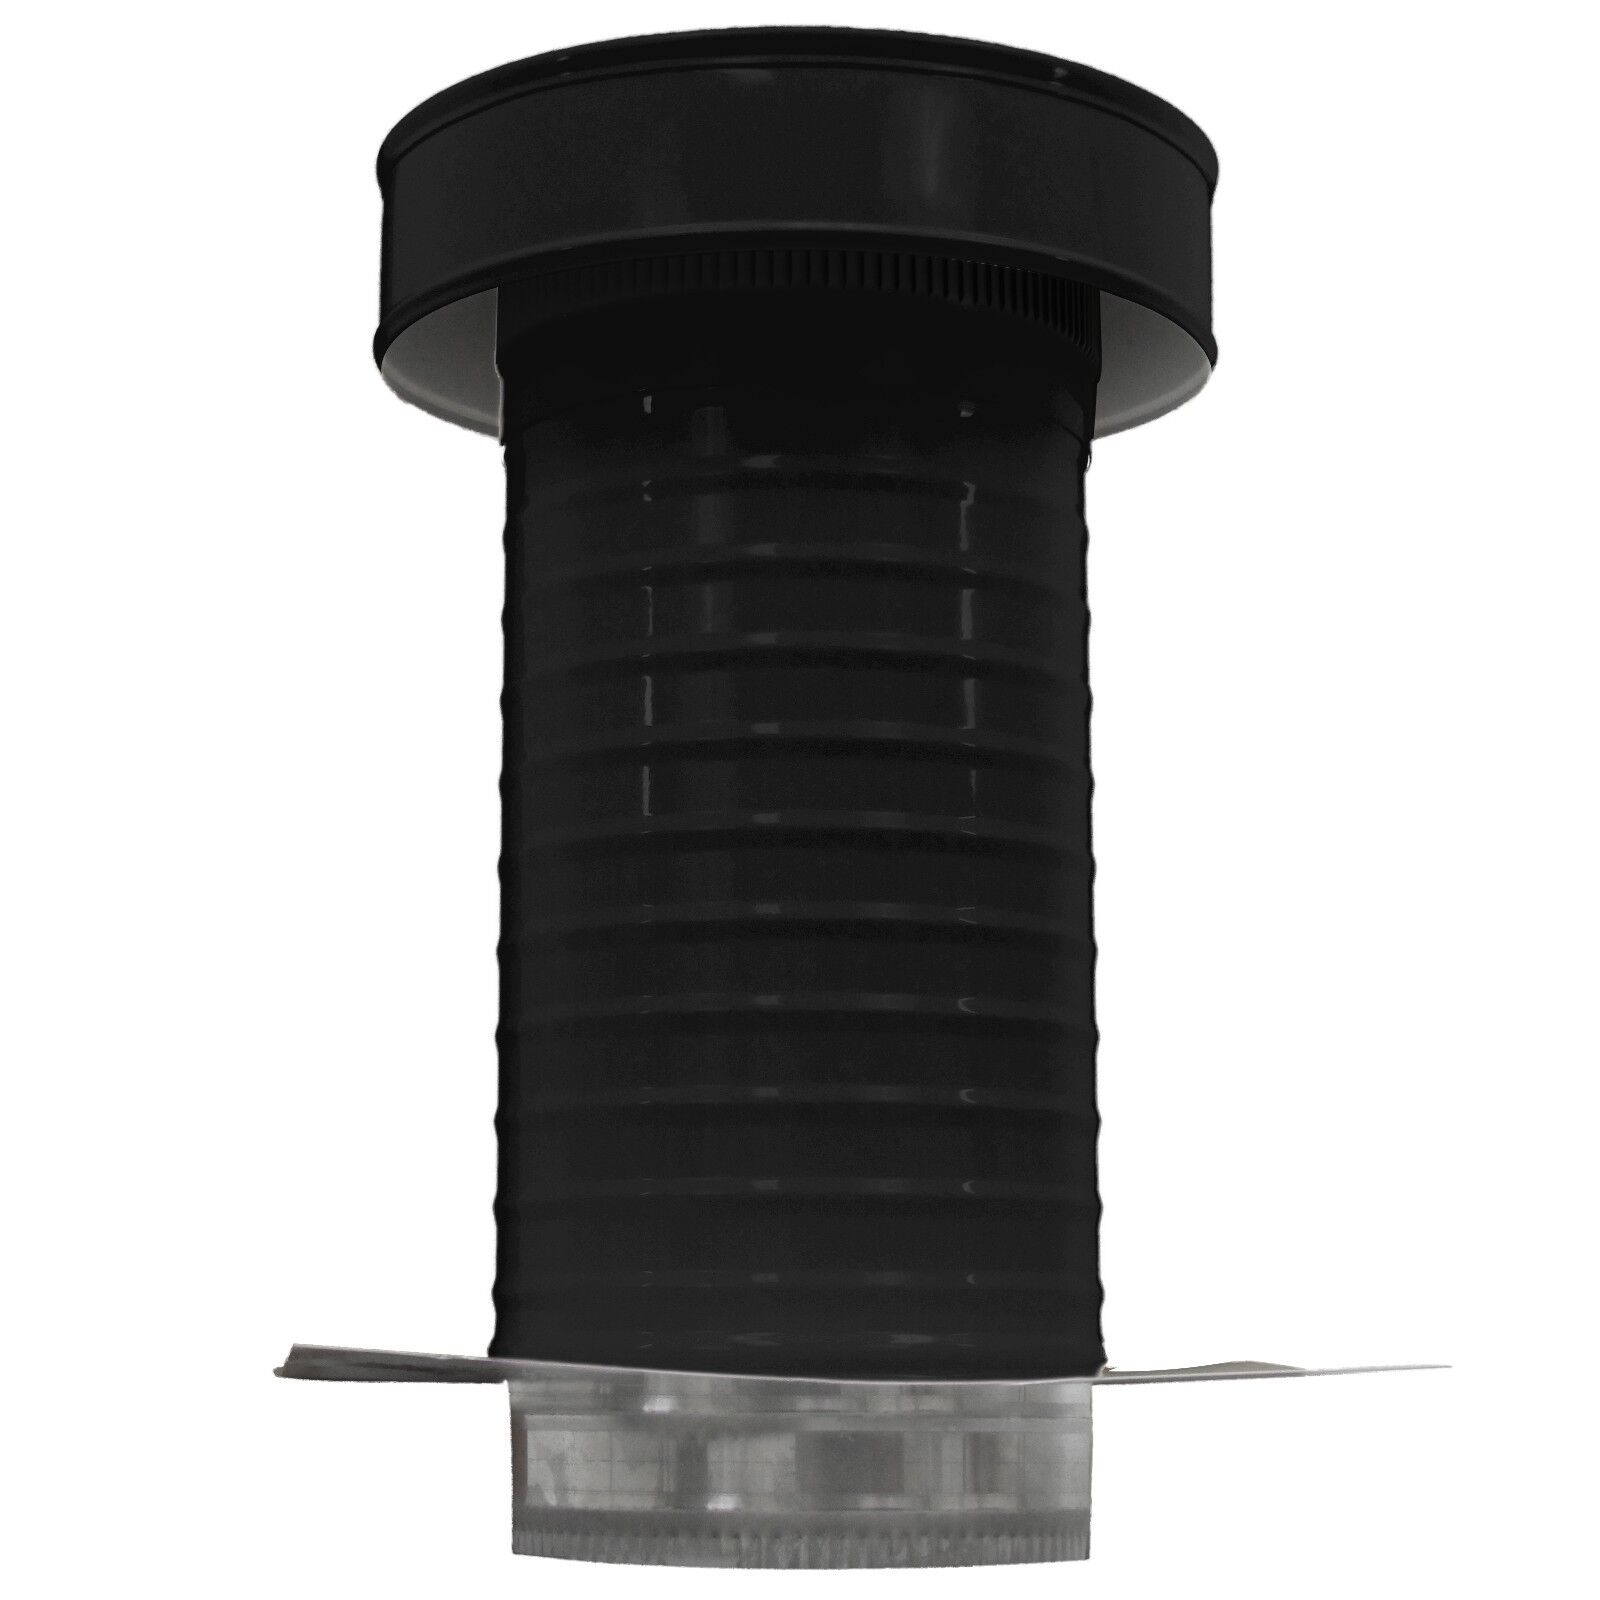 7 Inch Diameter Aluminum Keepa Roof Jack Vent Cap With Tail Pipe In Black